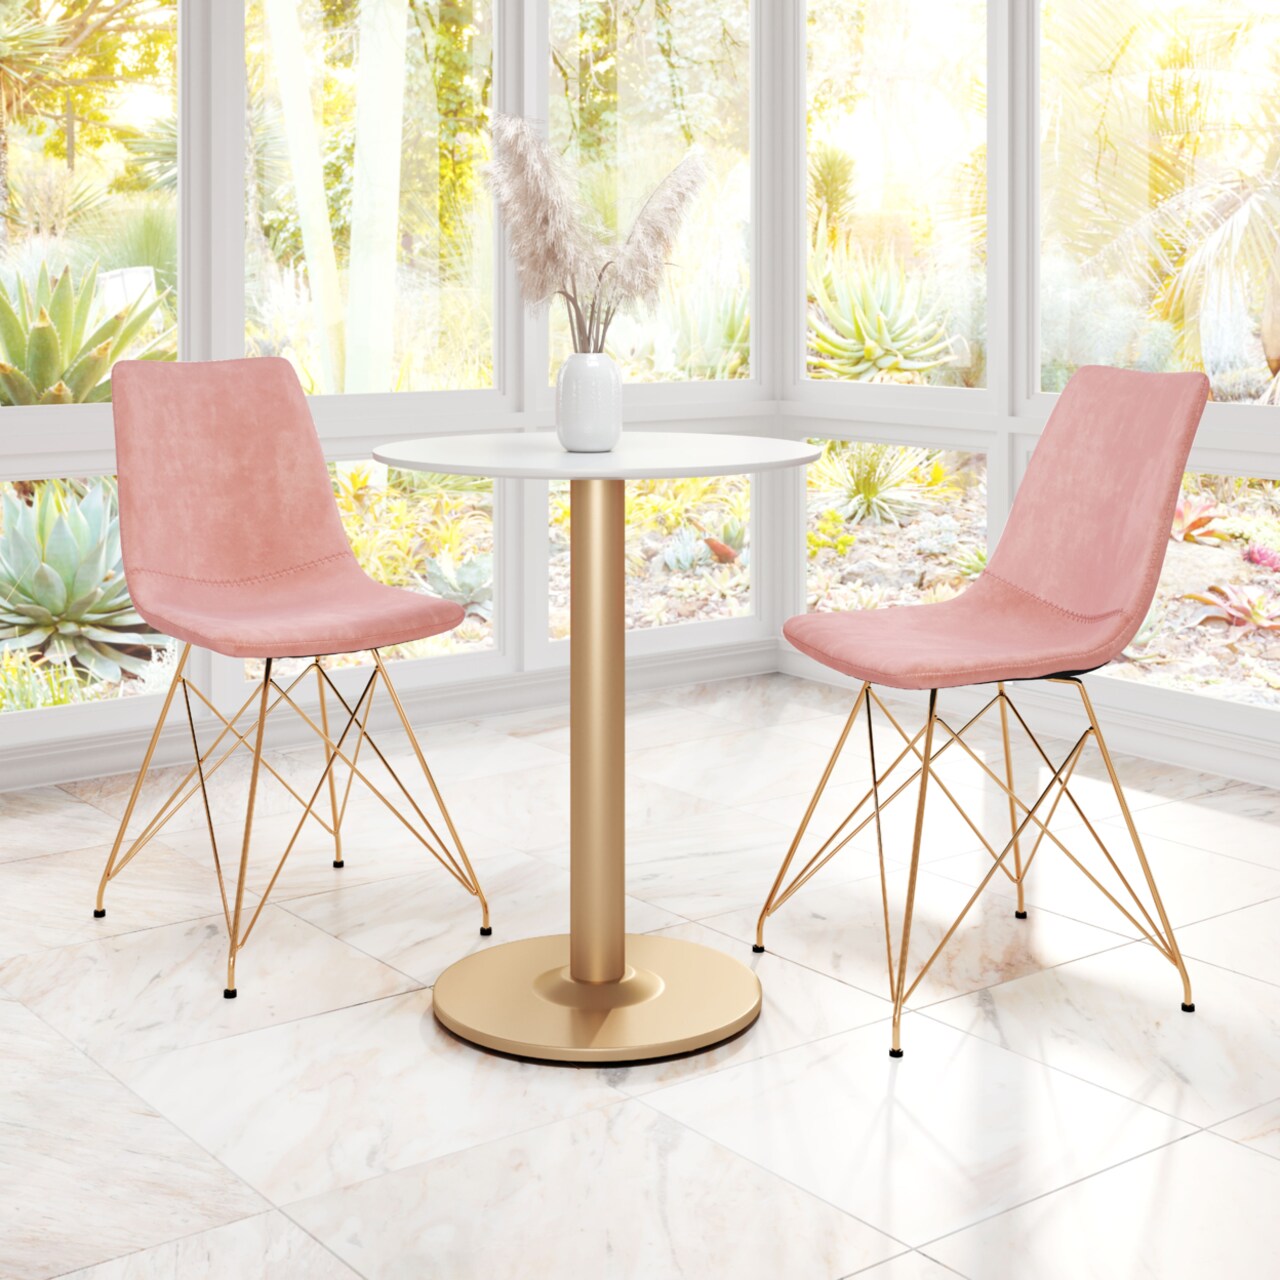 Zuo Modern Parker Dining Chair (Set of 4) Pink